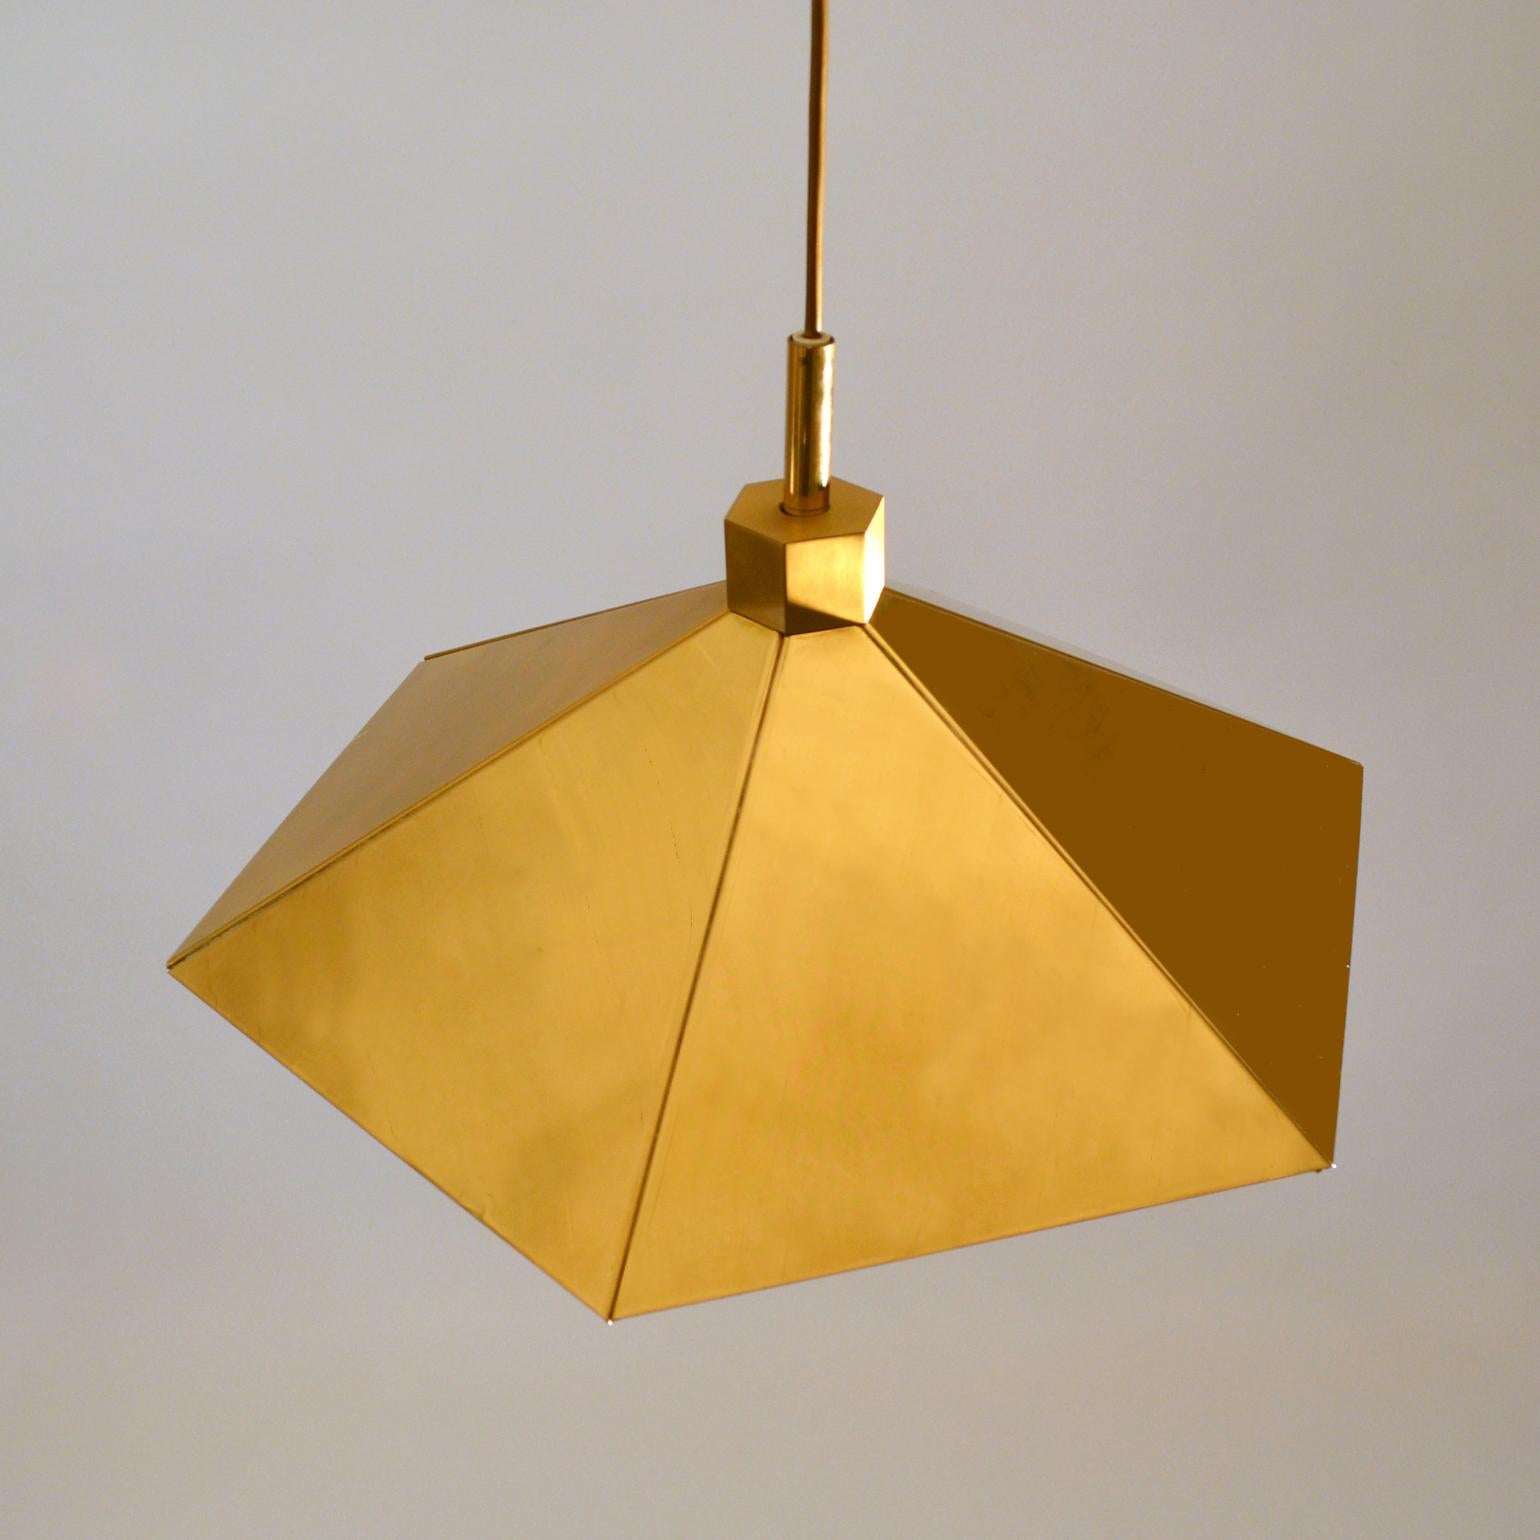 Angular brass pendant lamps pair in umbrella shape sheets of polished brass, 1970s Belgium. Inside they are enamelled to reflect the light. Perfect to use over a dining table or kitchen isle.
Mid-Century Modern lamps are ready to go.
Diameter each